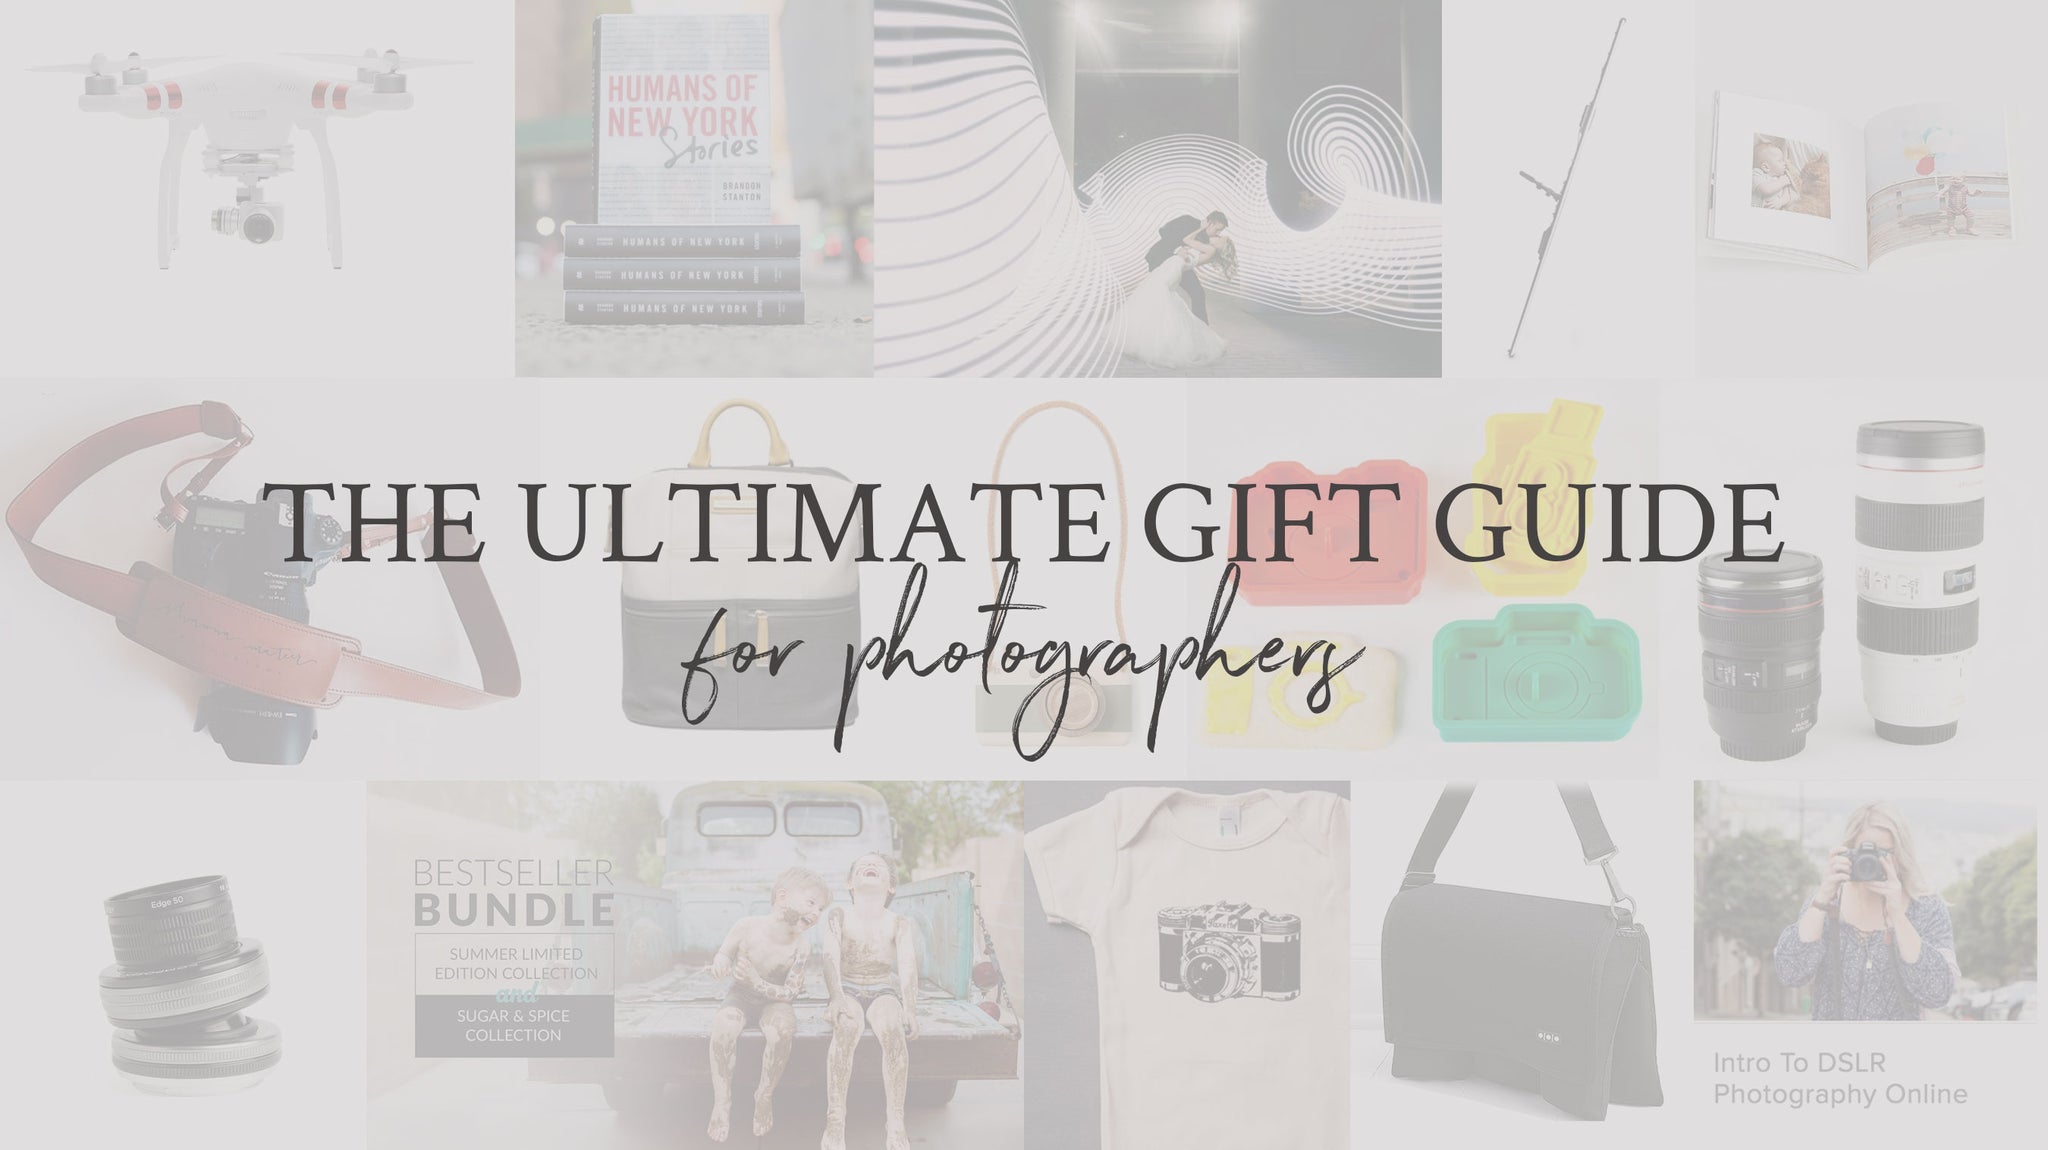 The Ultimate Gift Guide for Photographers | FOTO Blog